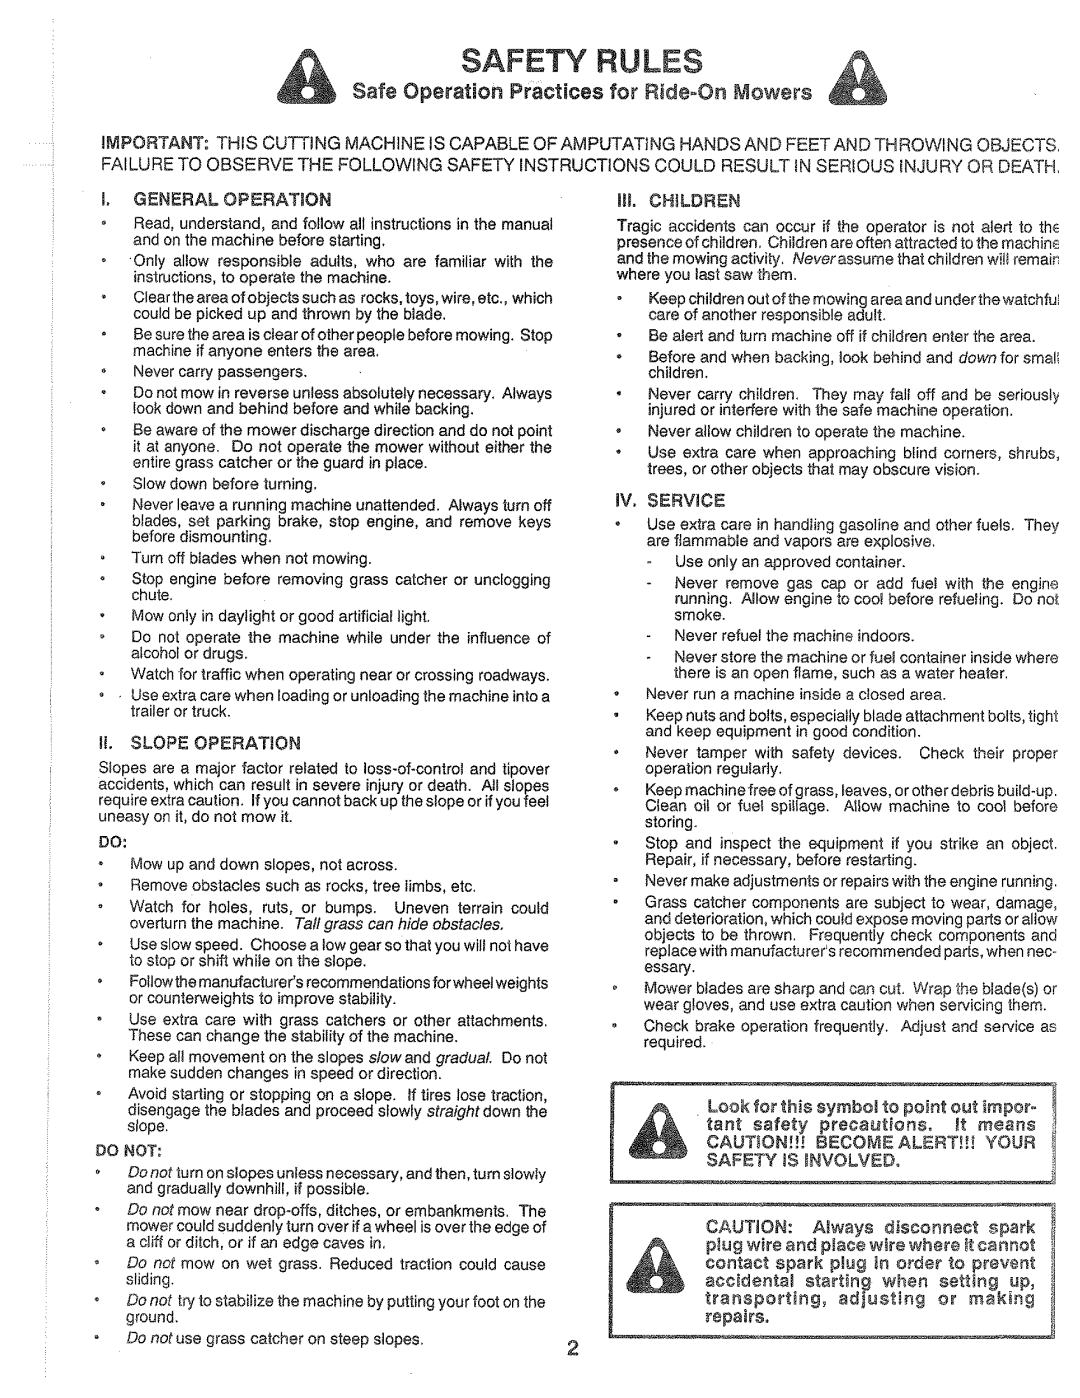 Sears 917.25559 manual Safety Rules, Safe Operation Practices for RideOn Mowers 